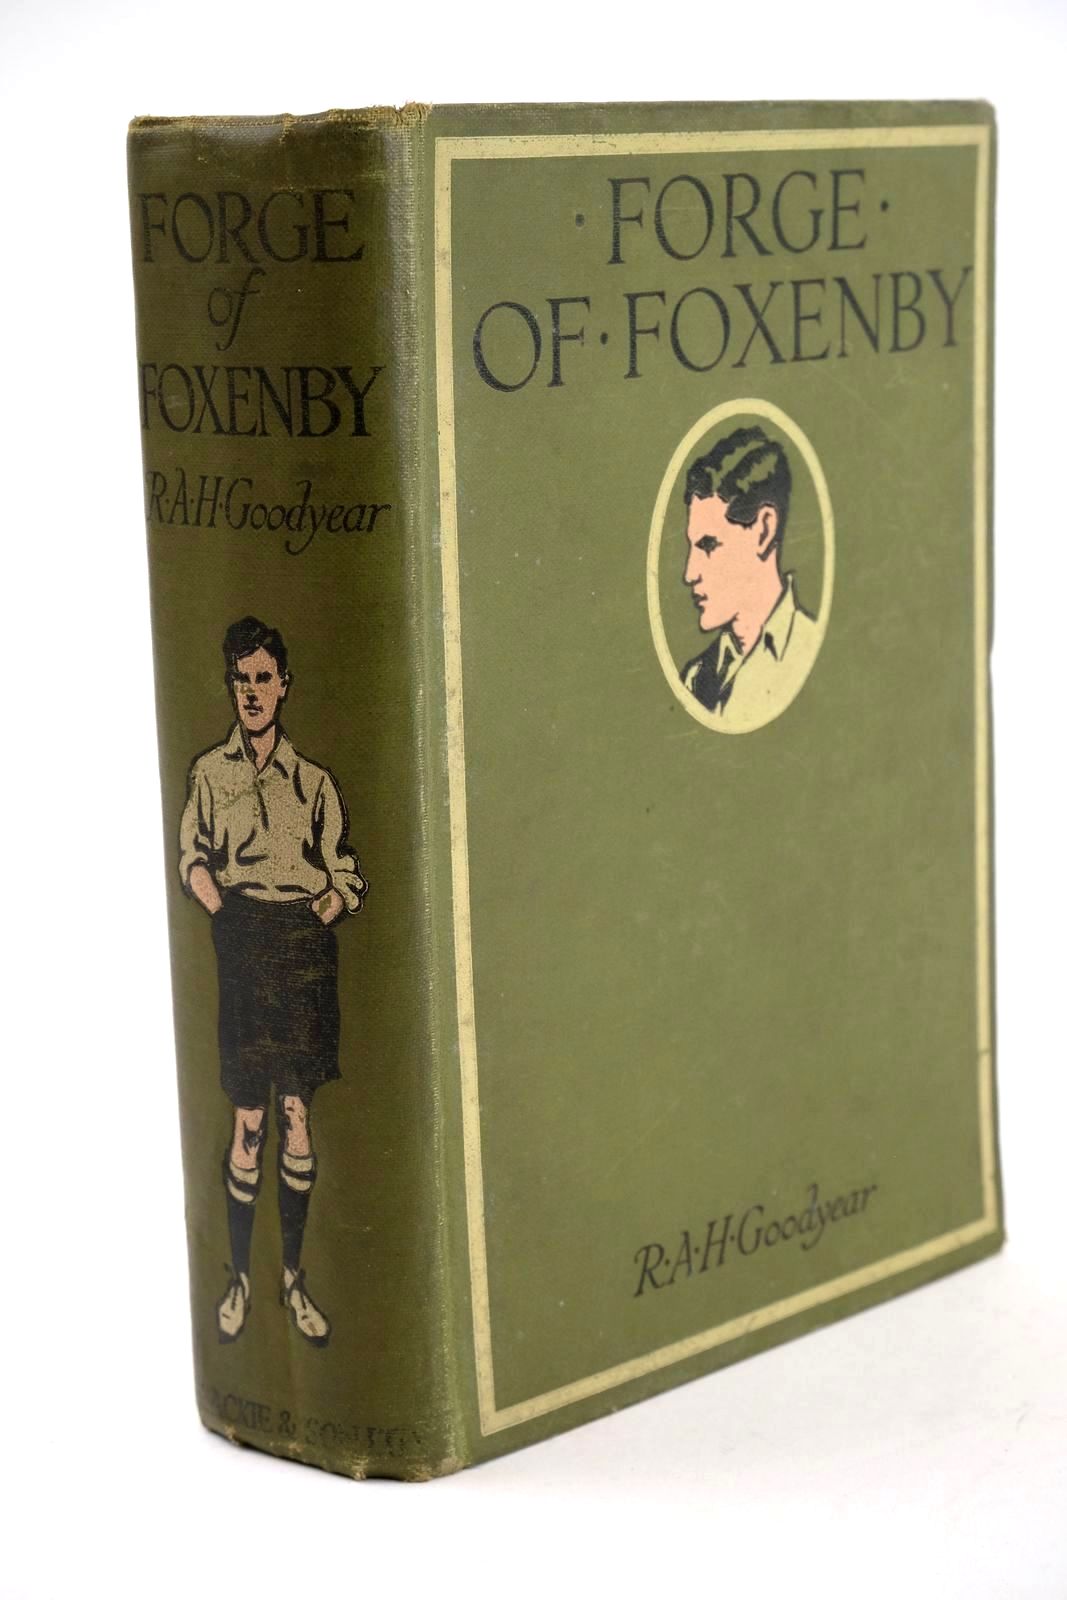 Photo of FORGE OF FOXENBY written by Goodyear, R.A.H. illustrated by Whitwell, T.M.R. published by Blackie And Son Limited (STOCK CODE: 1324057)  for sale by Stella & Rose's Books